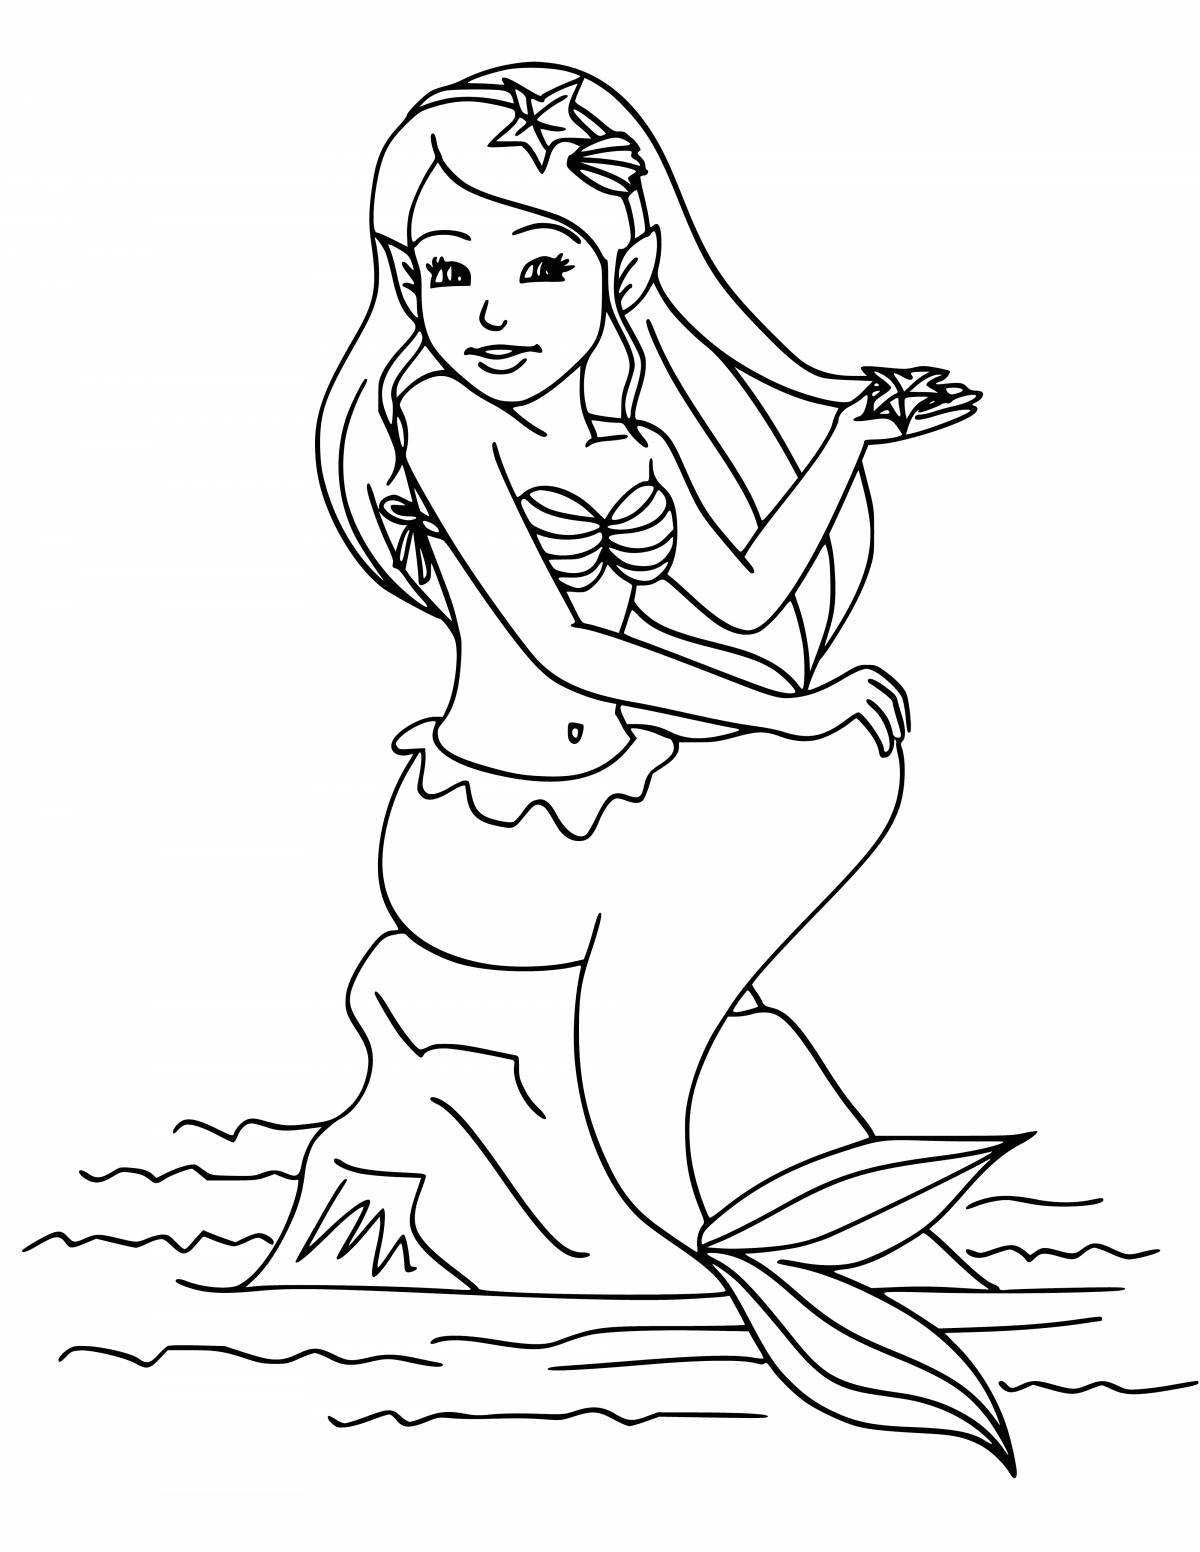 Gorgeous mermaid coloring book for girls